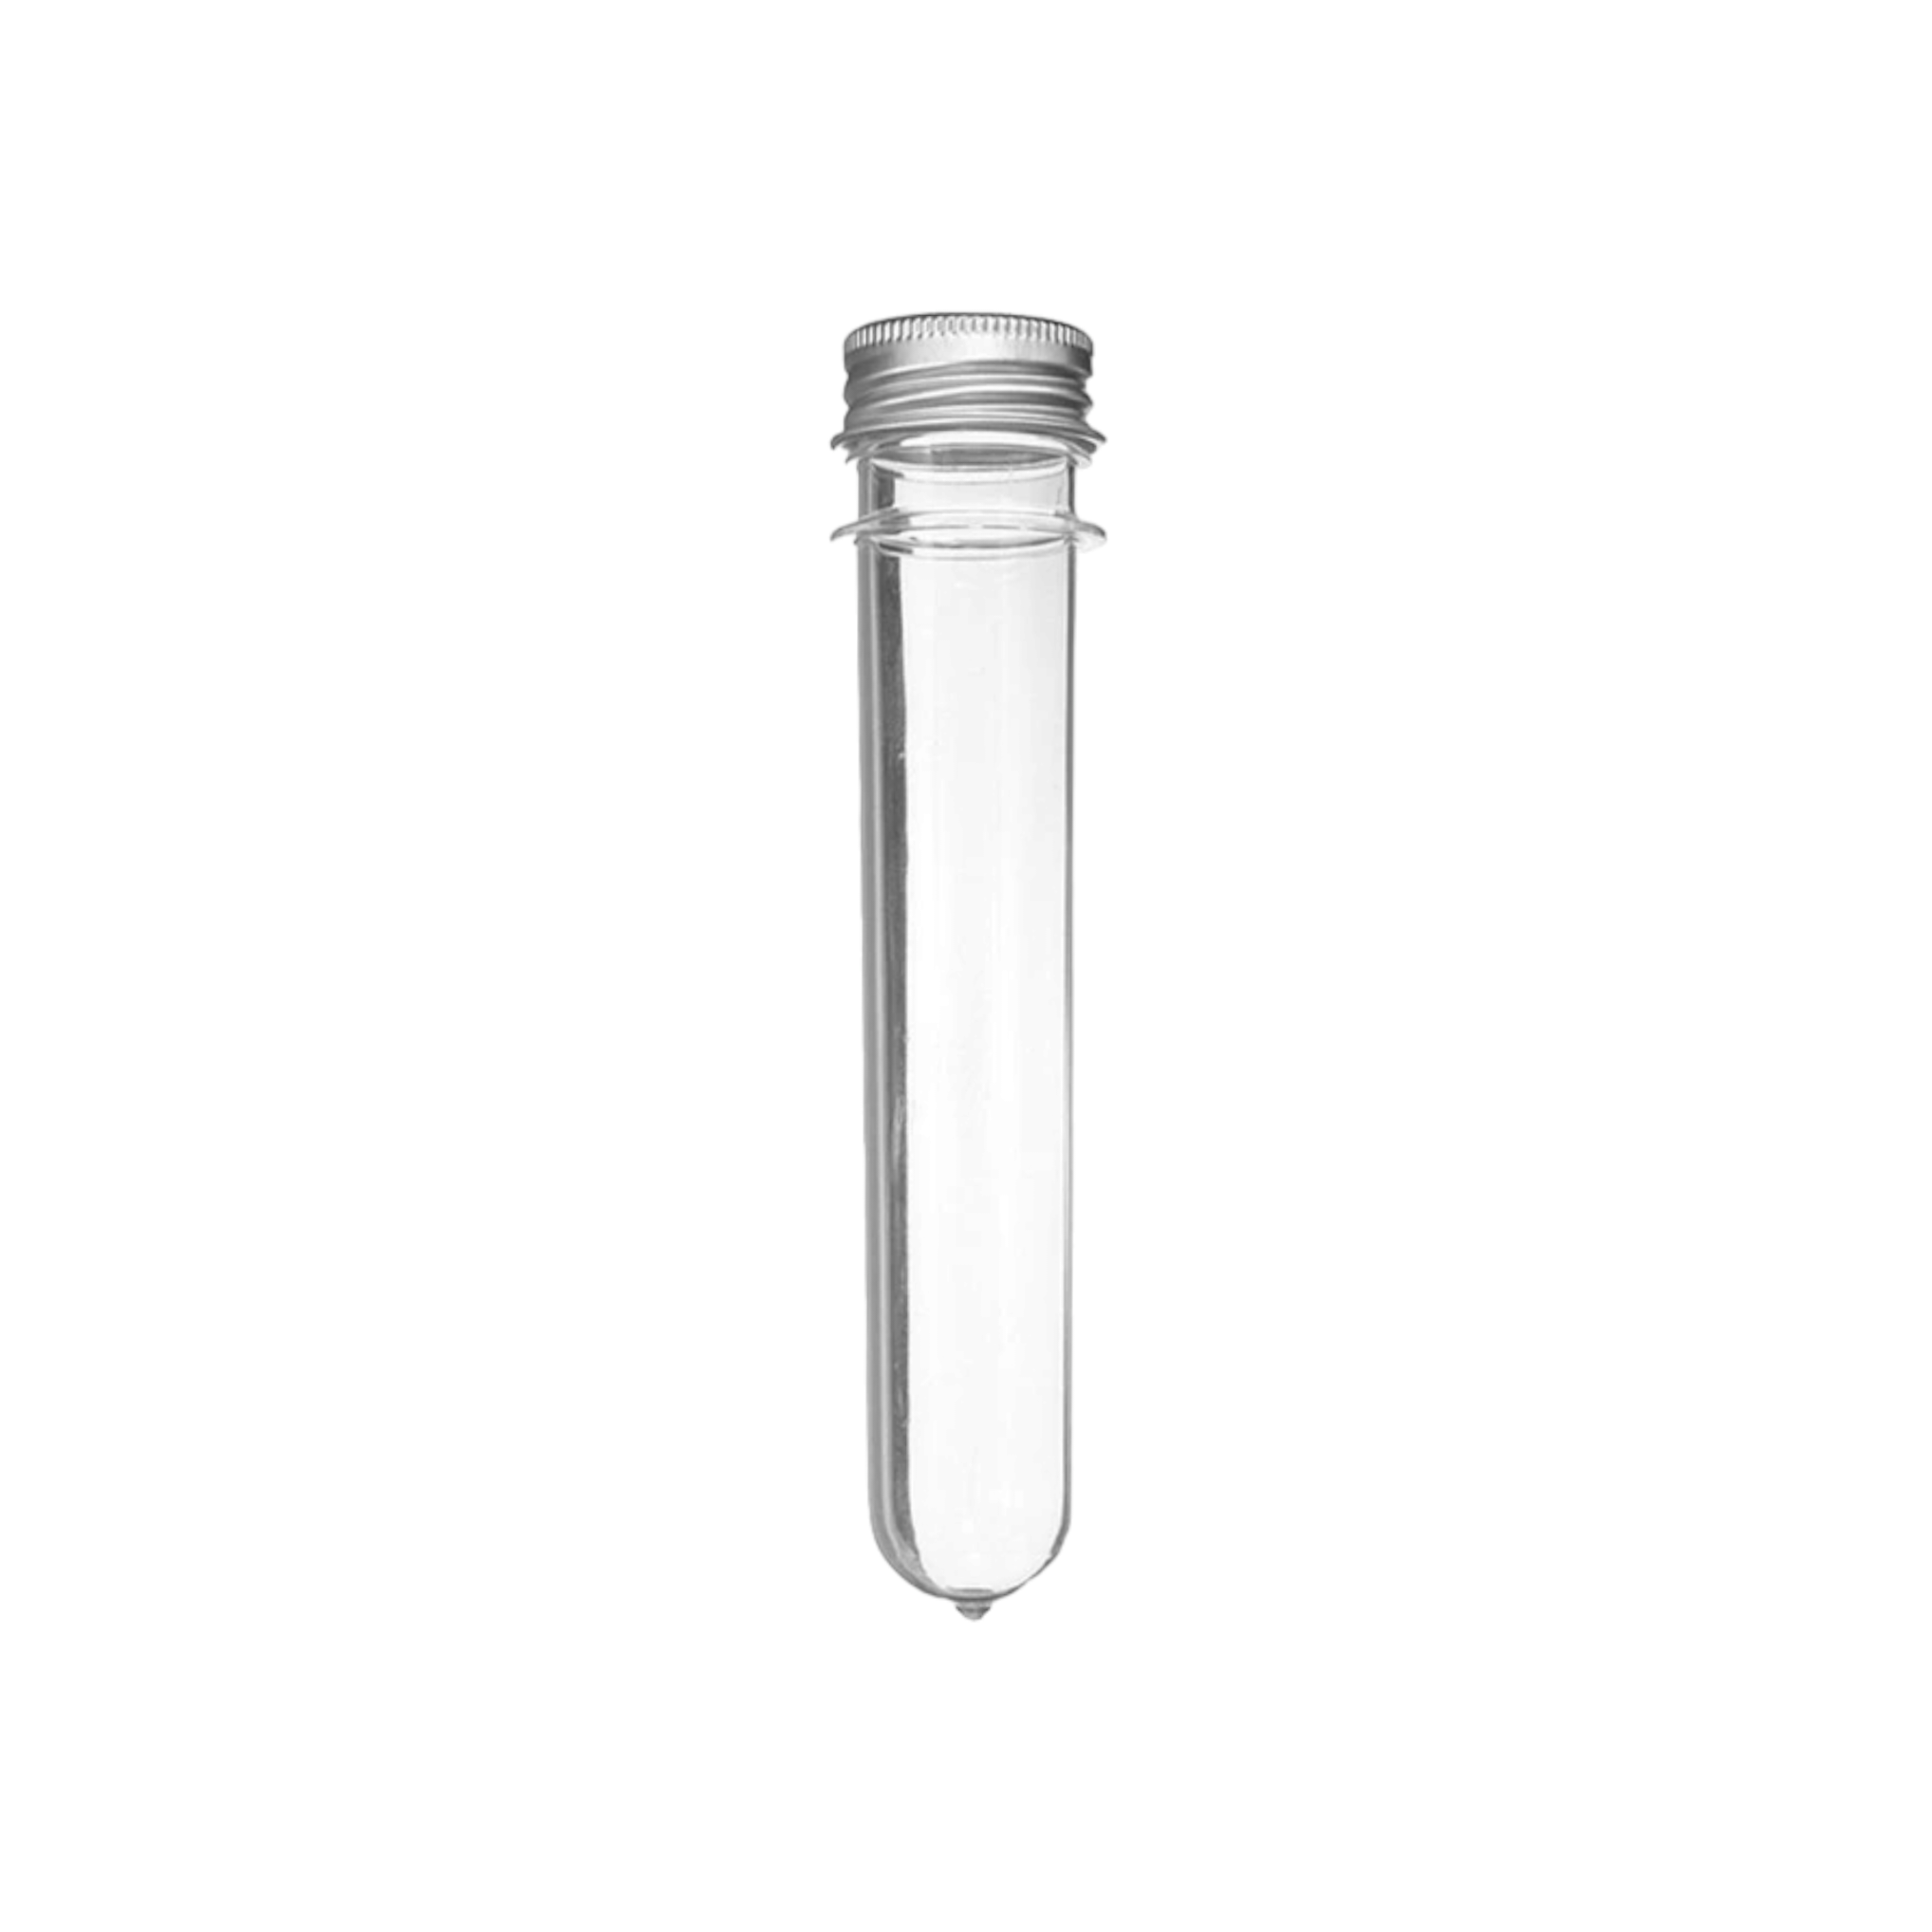 Plastic PET Test Tube - Vials Container Bottle Tube Shape with Silver Lid